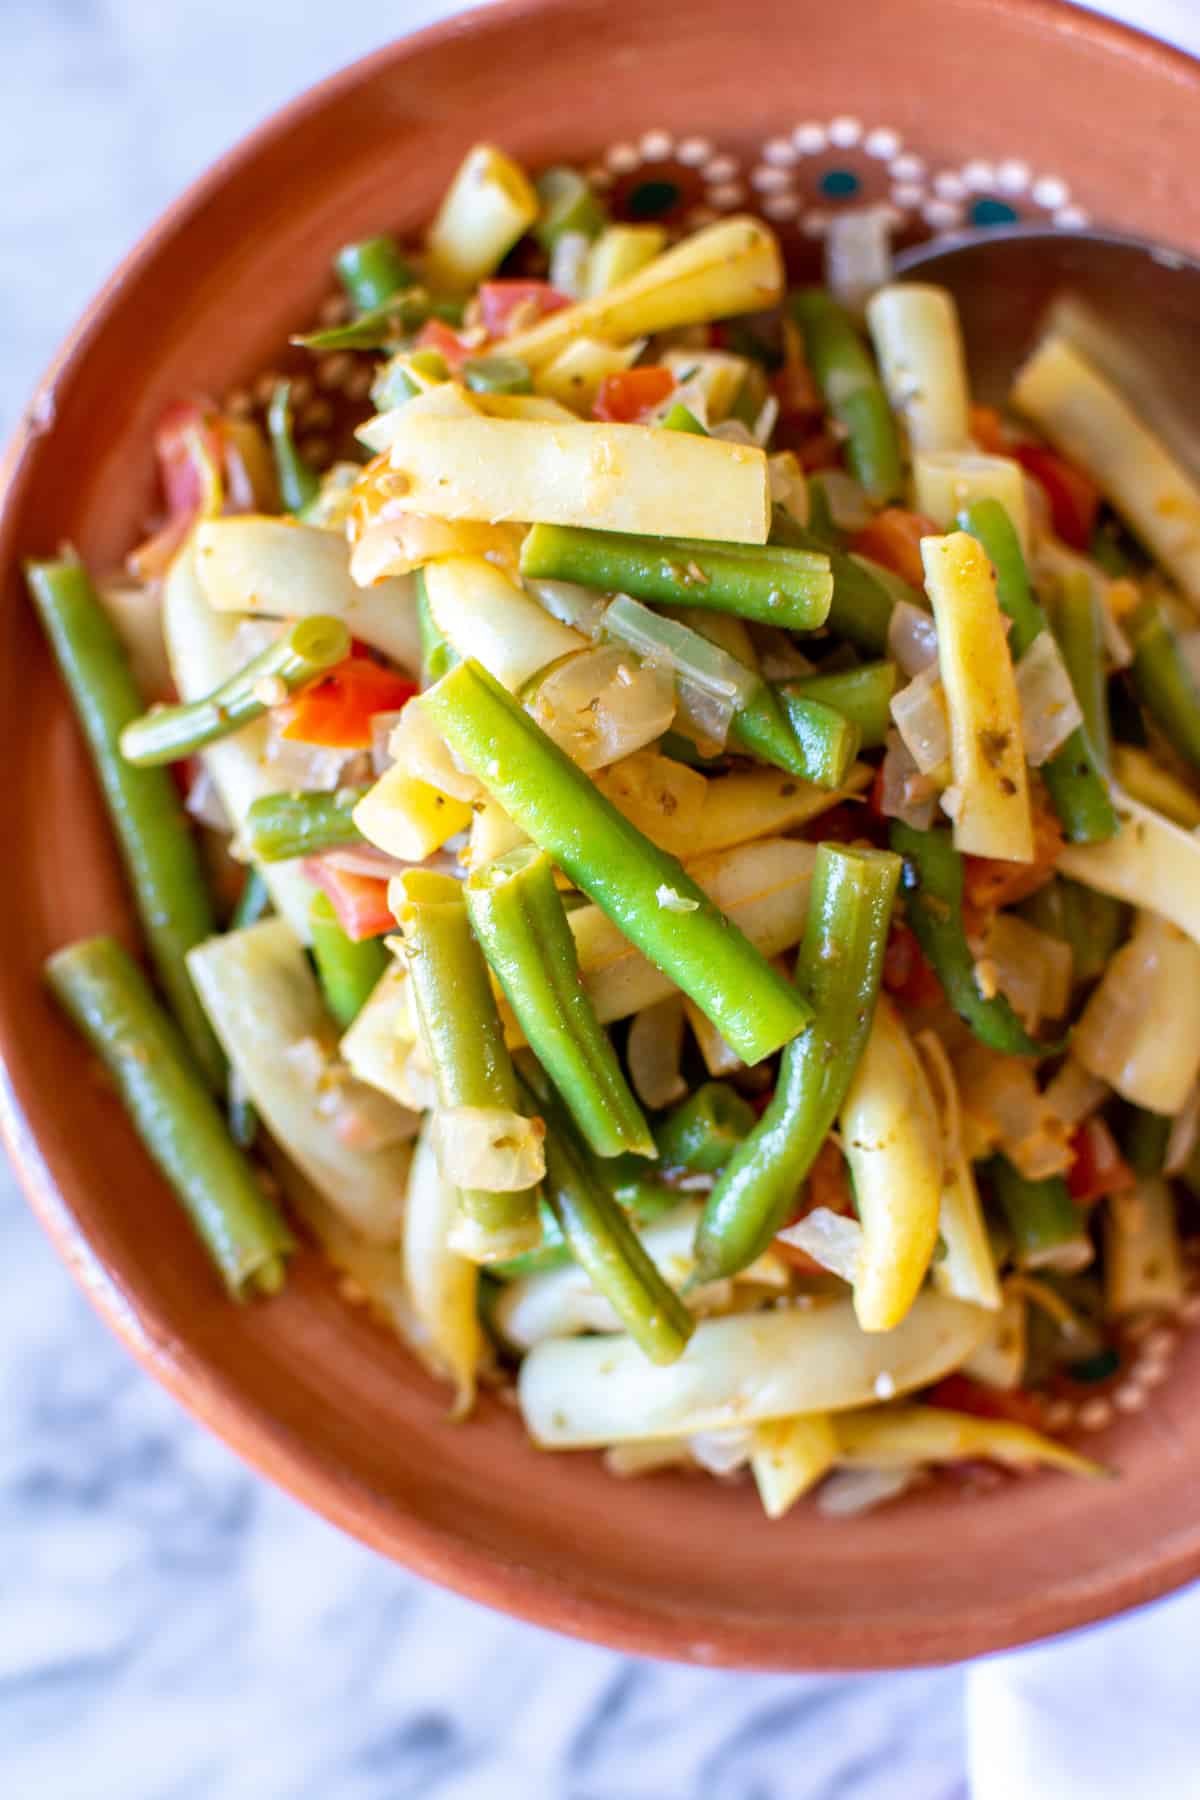 A terracotta bowl filled with green beans and yellow wax beans sautéed with tomatoes and onions.